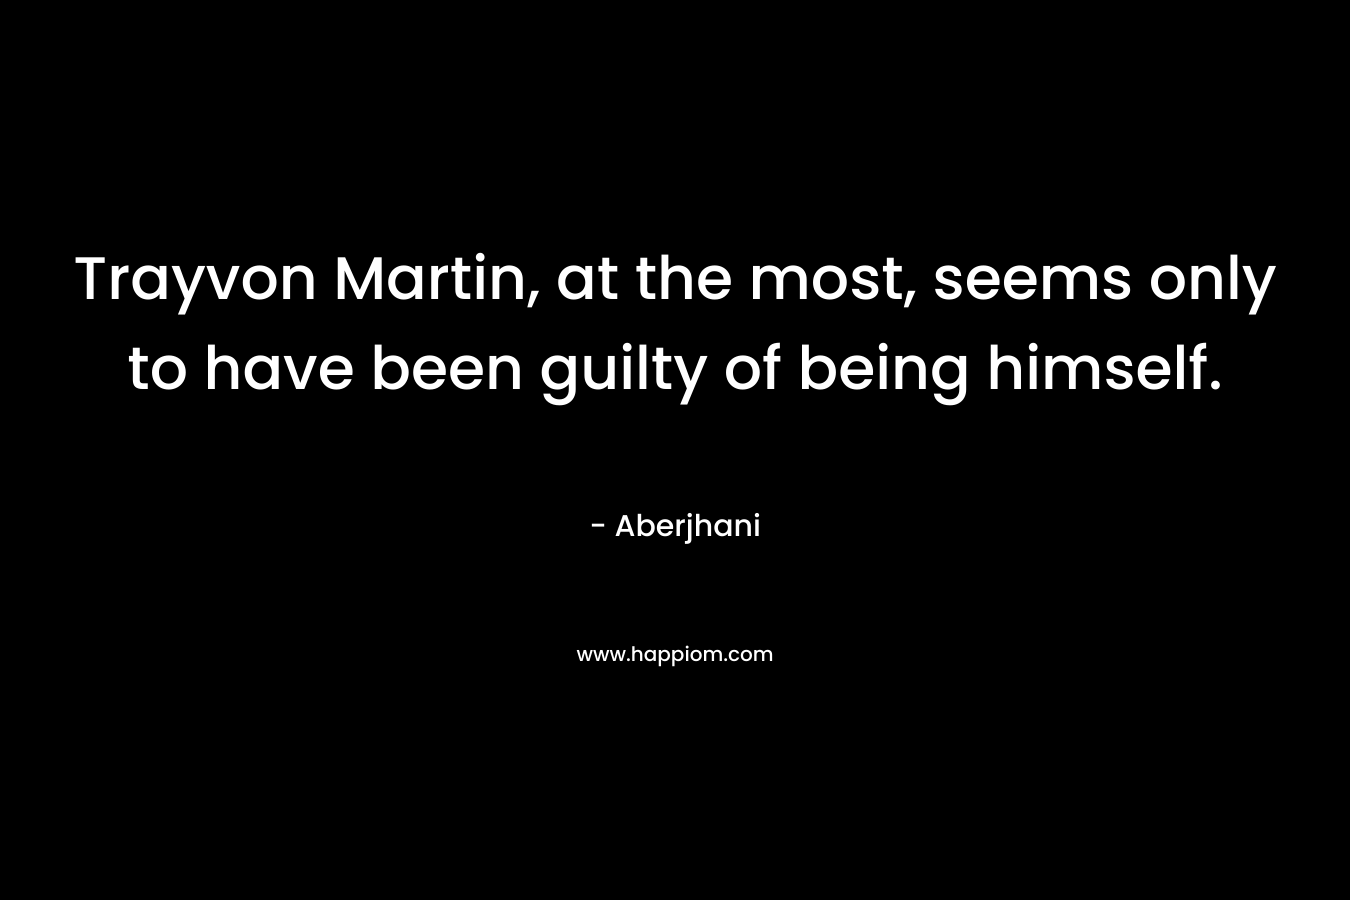 Trayvon Martin, at the most, seems only to have been guilty of being himself. – Aberjhani